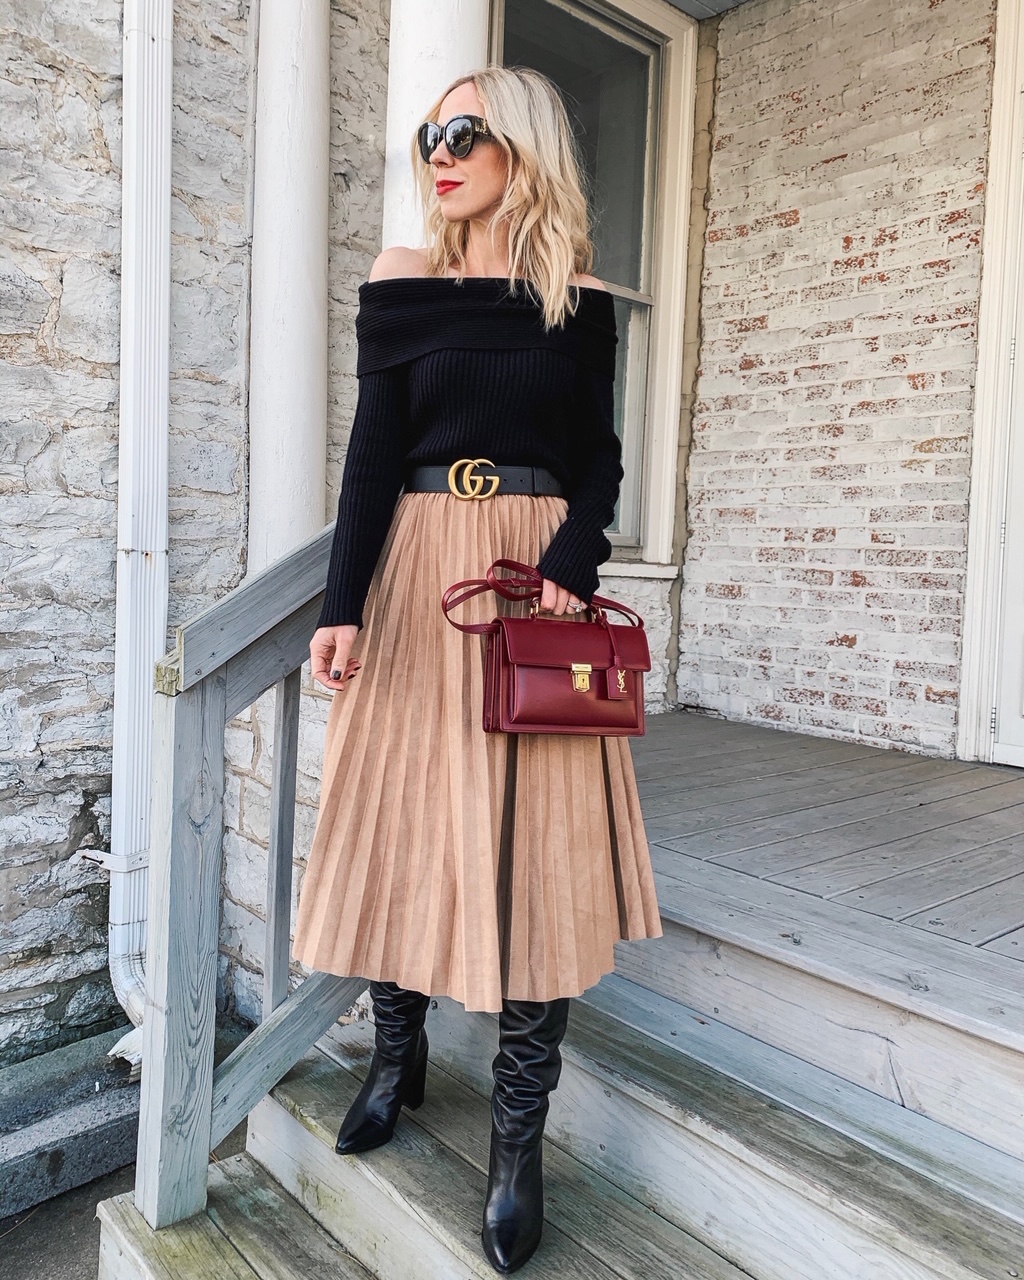 Meagan-Brandon-fashion-blogger-of-Meagans-Moda-shares-romantic-outfit-idea-for-Valentines-Day-with-off-shoulder-sweater-and-pleated-midi-skirt.jpg